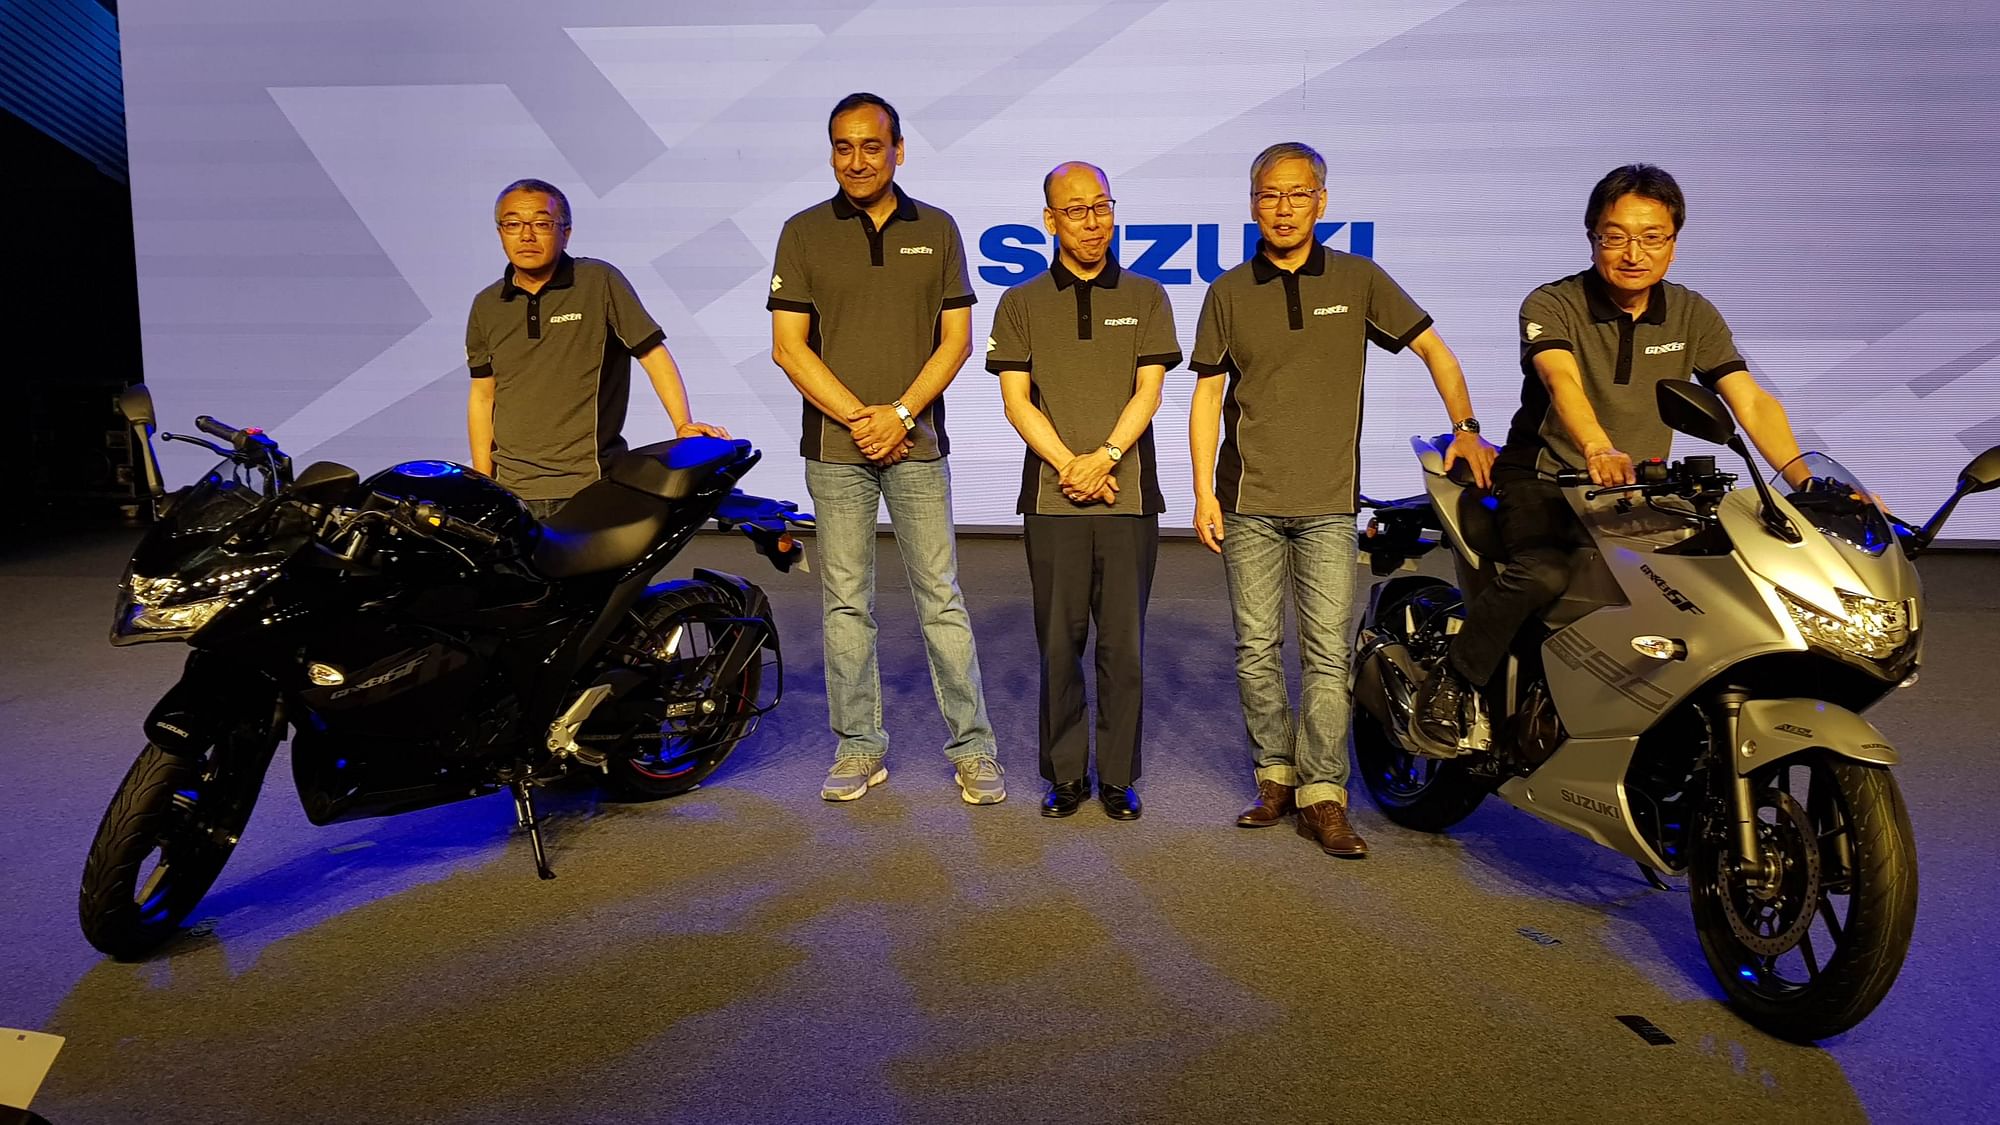 The Suzuki Gixxer SF 150 (left) and Suzuki Gixxer SF 250 (right) with the top management at the company.&nbsp;